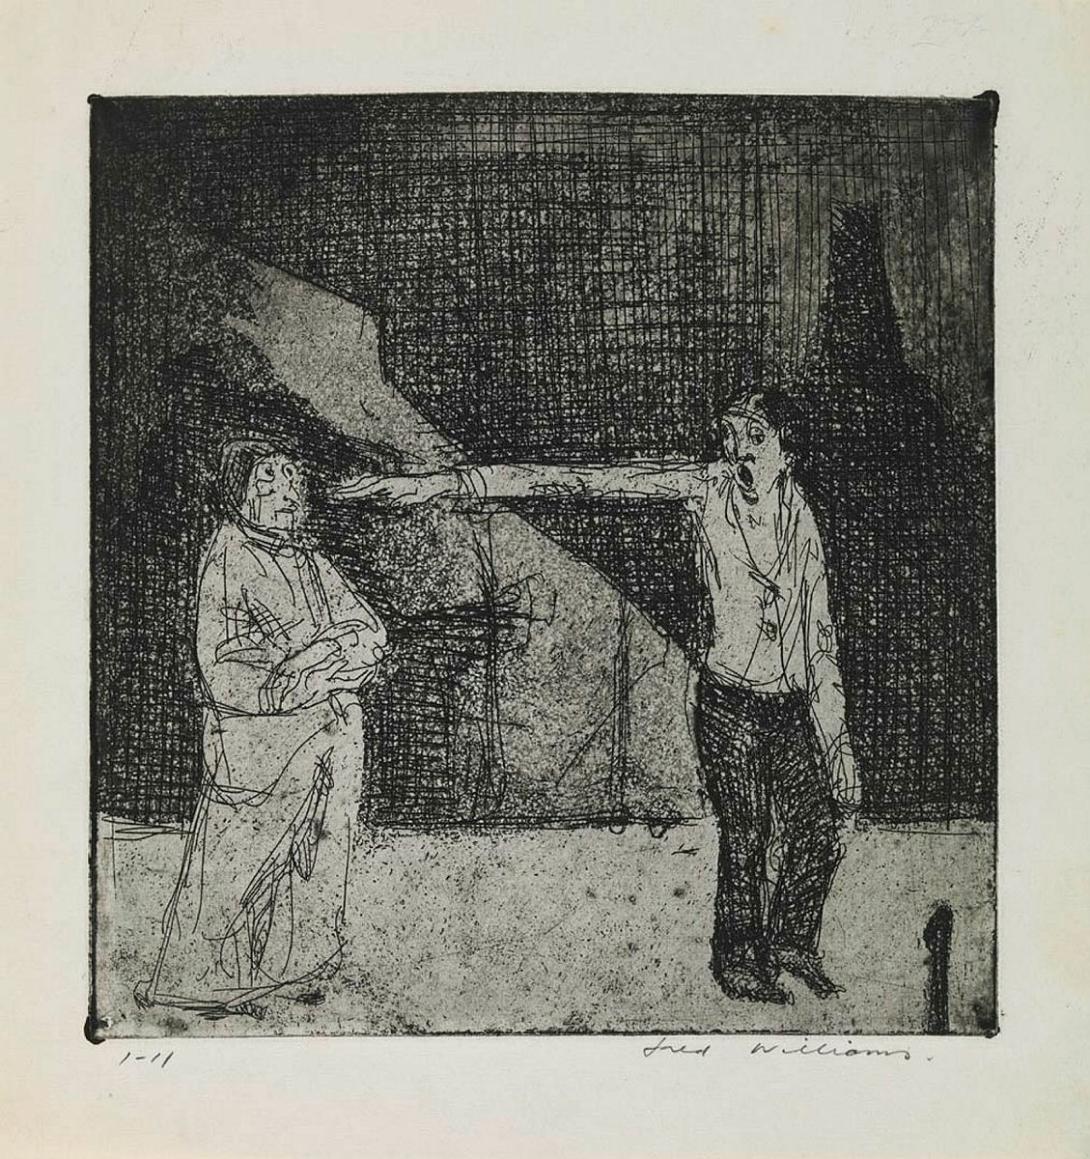 Artwork Mountebank accusing his mother (from 'Music hall' series) this artwork made of Etching and aquatint on paper, created in 1955-01-01